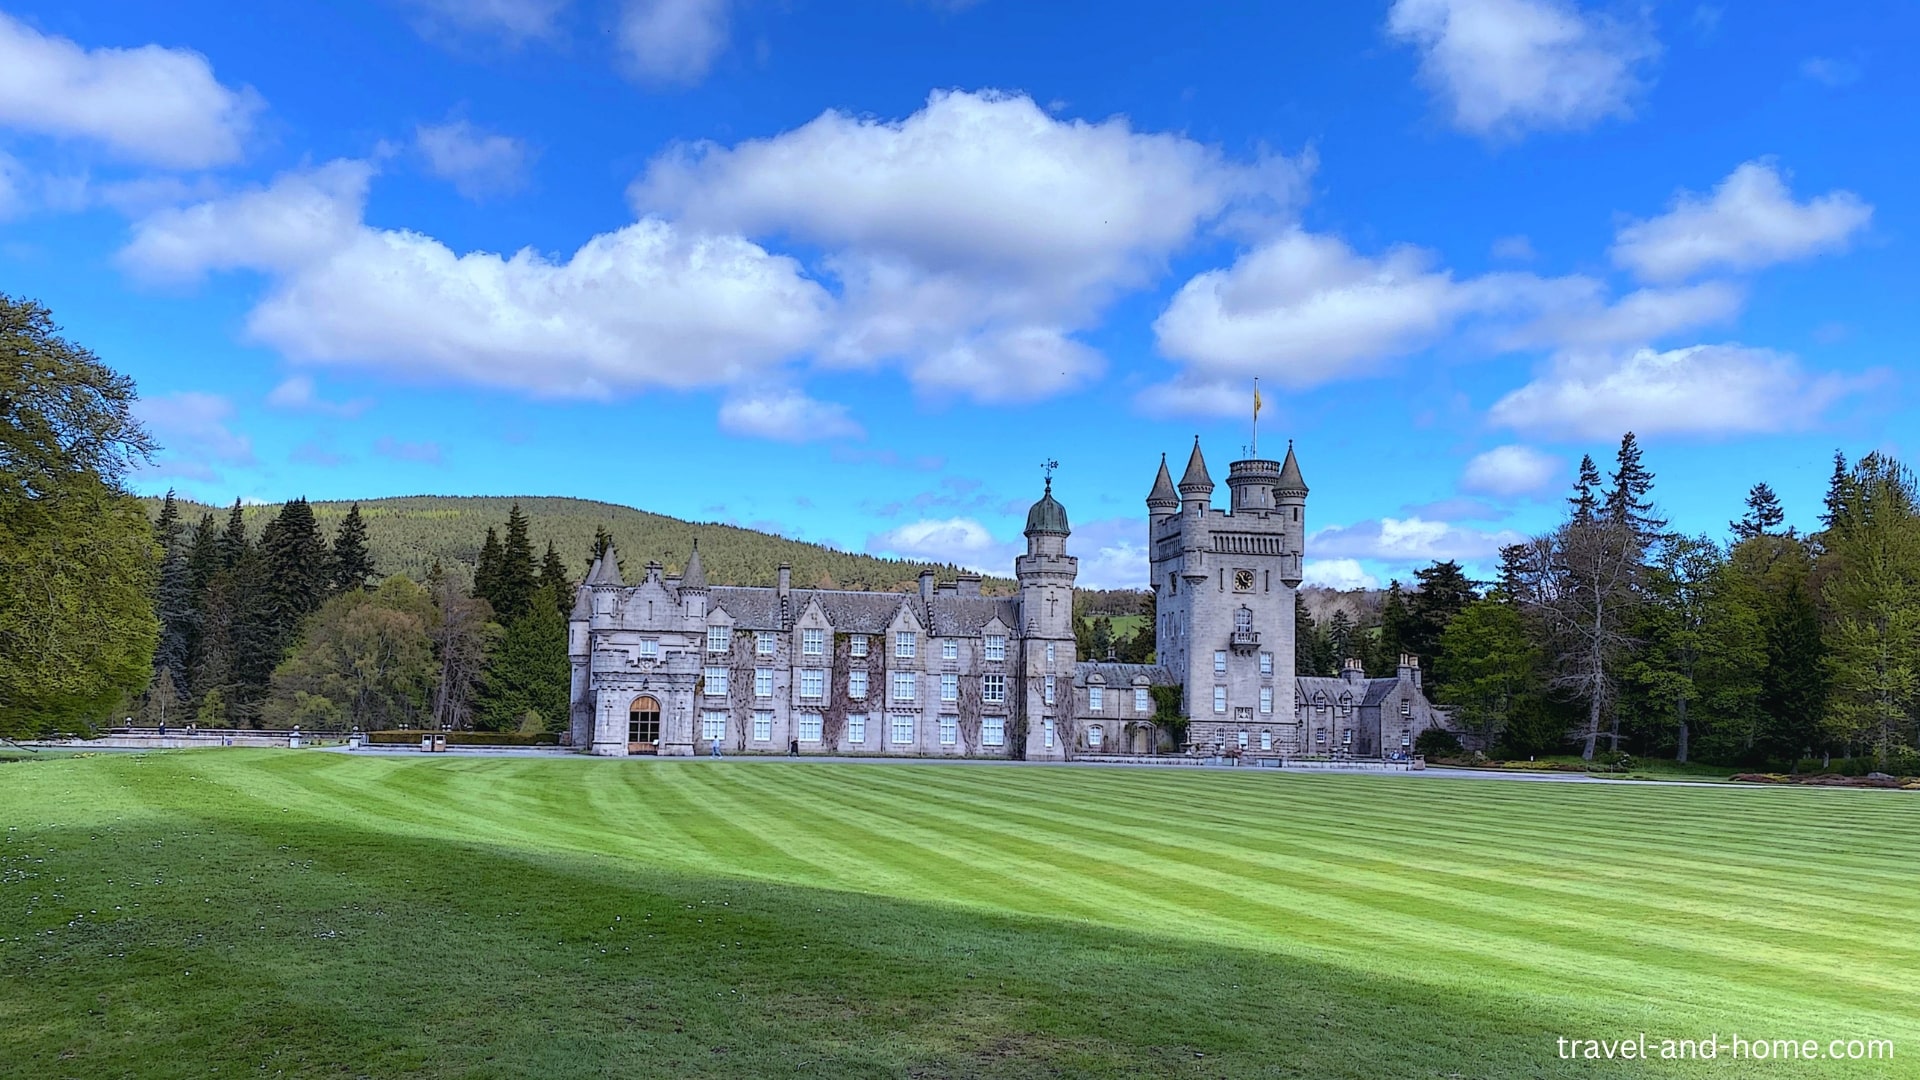 Stay like royalty, Balmoral Castle & Estate, self catering accommodation, book now min